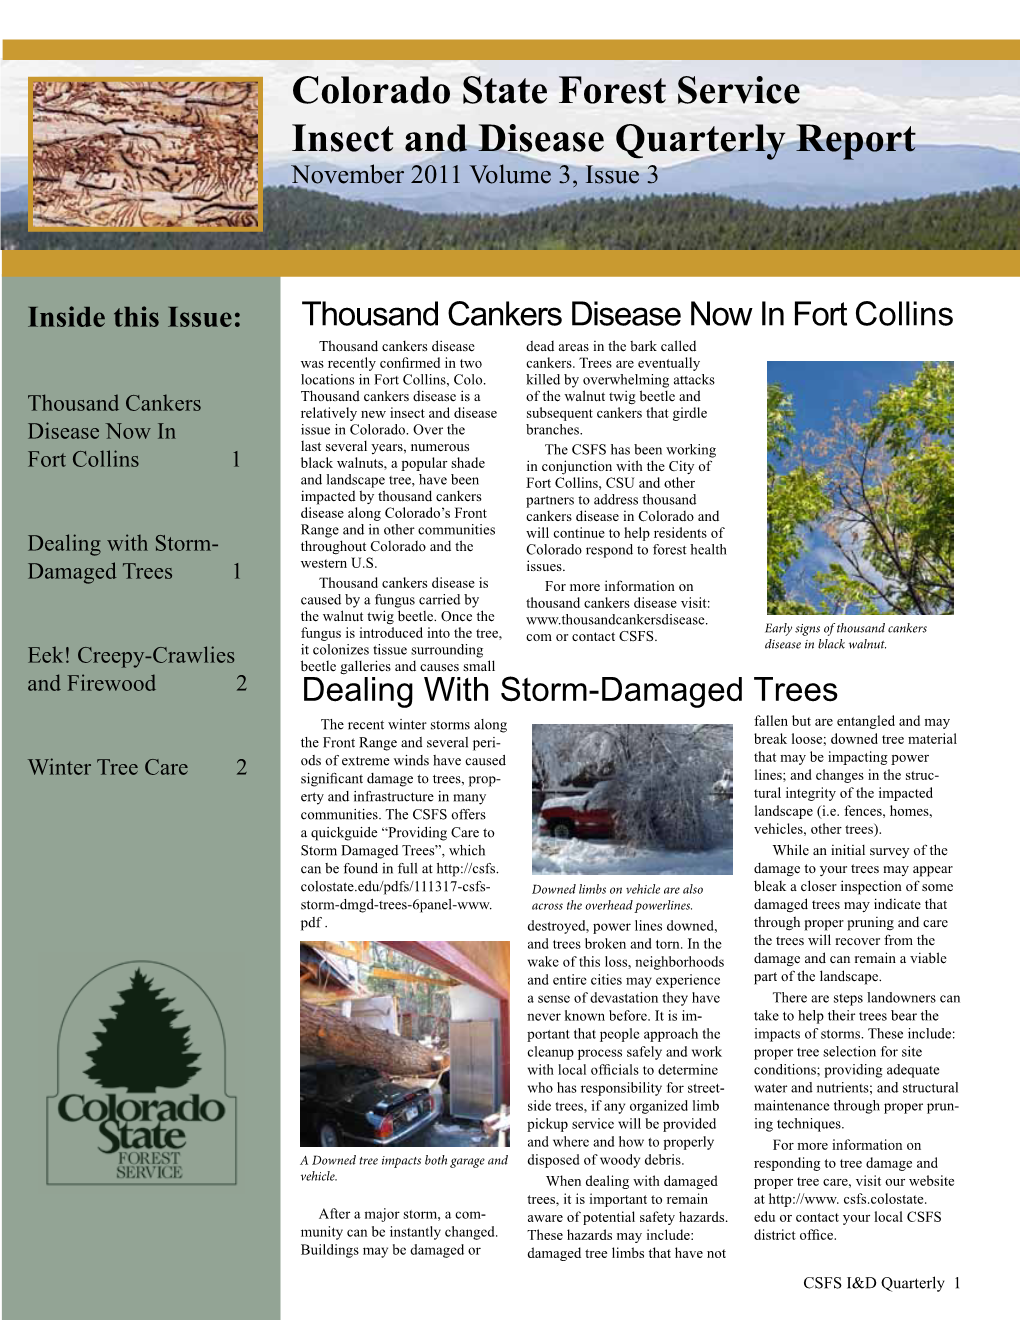 Colorado State Forest Service Insect and Disease Quarterly Report November 2011 Volume 3, Issue 3